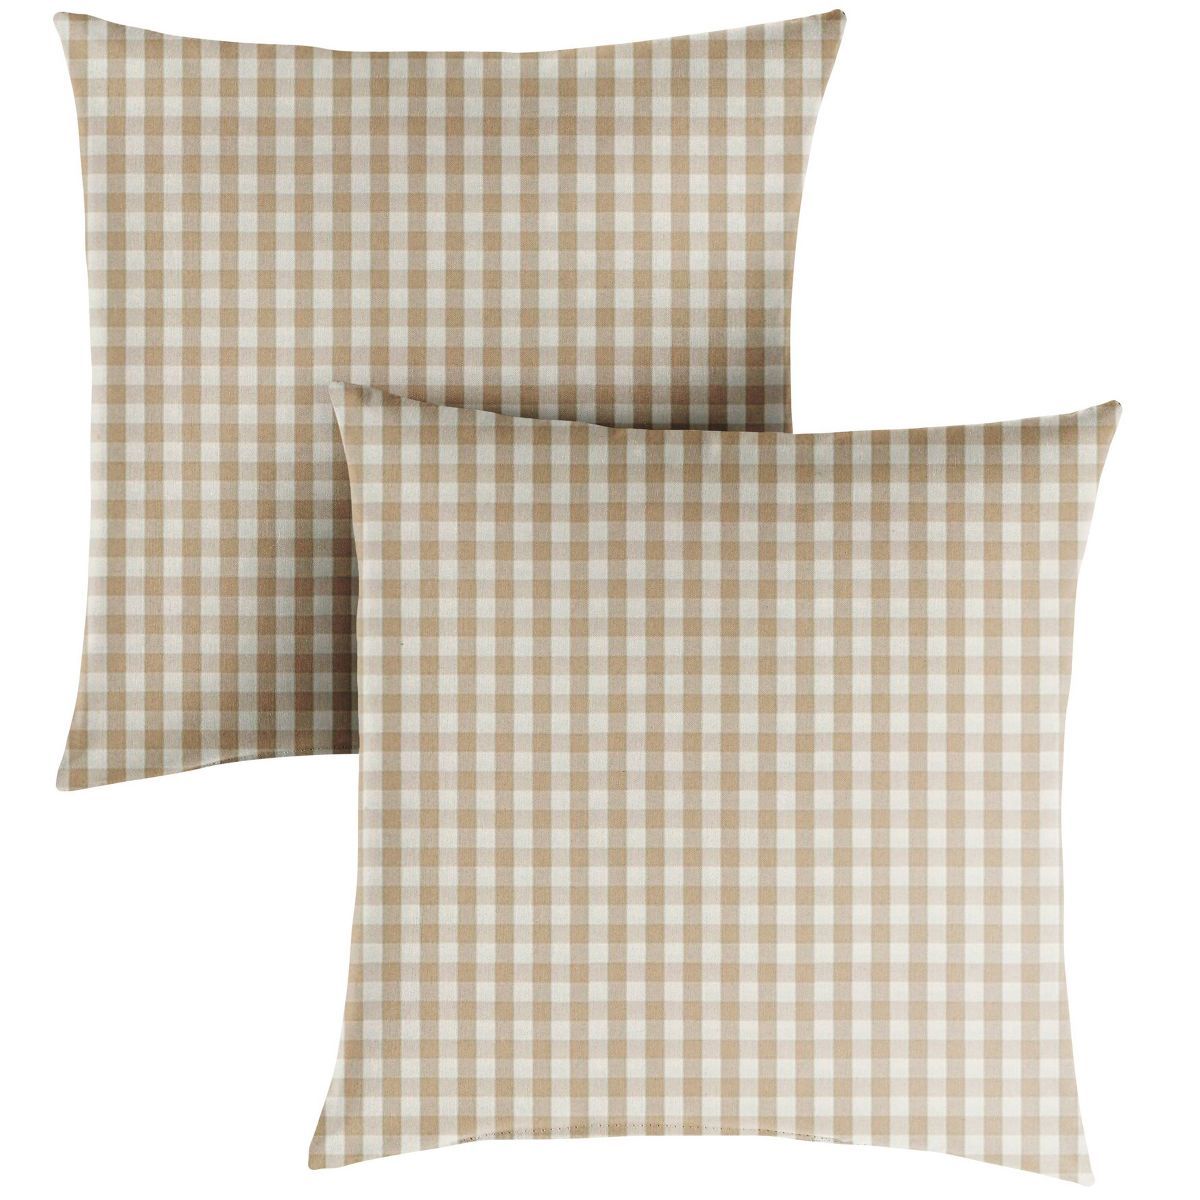 2pk Square Indoor Outdoor Throw Pillows Beige/White | Target